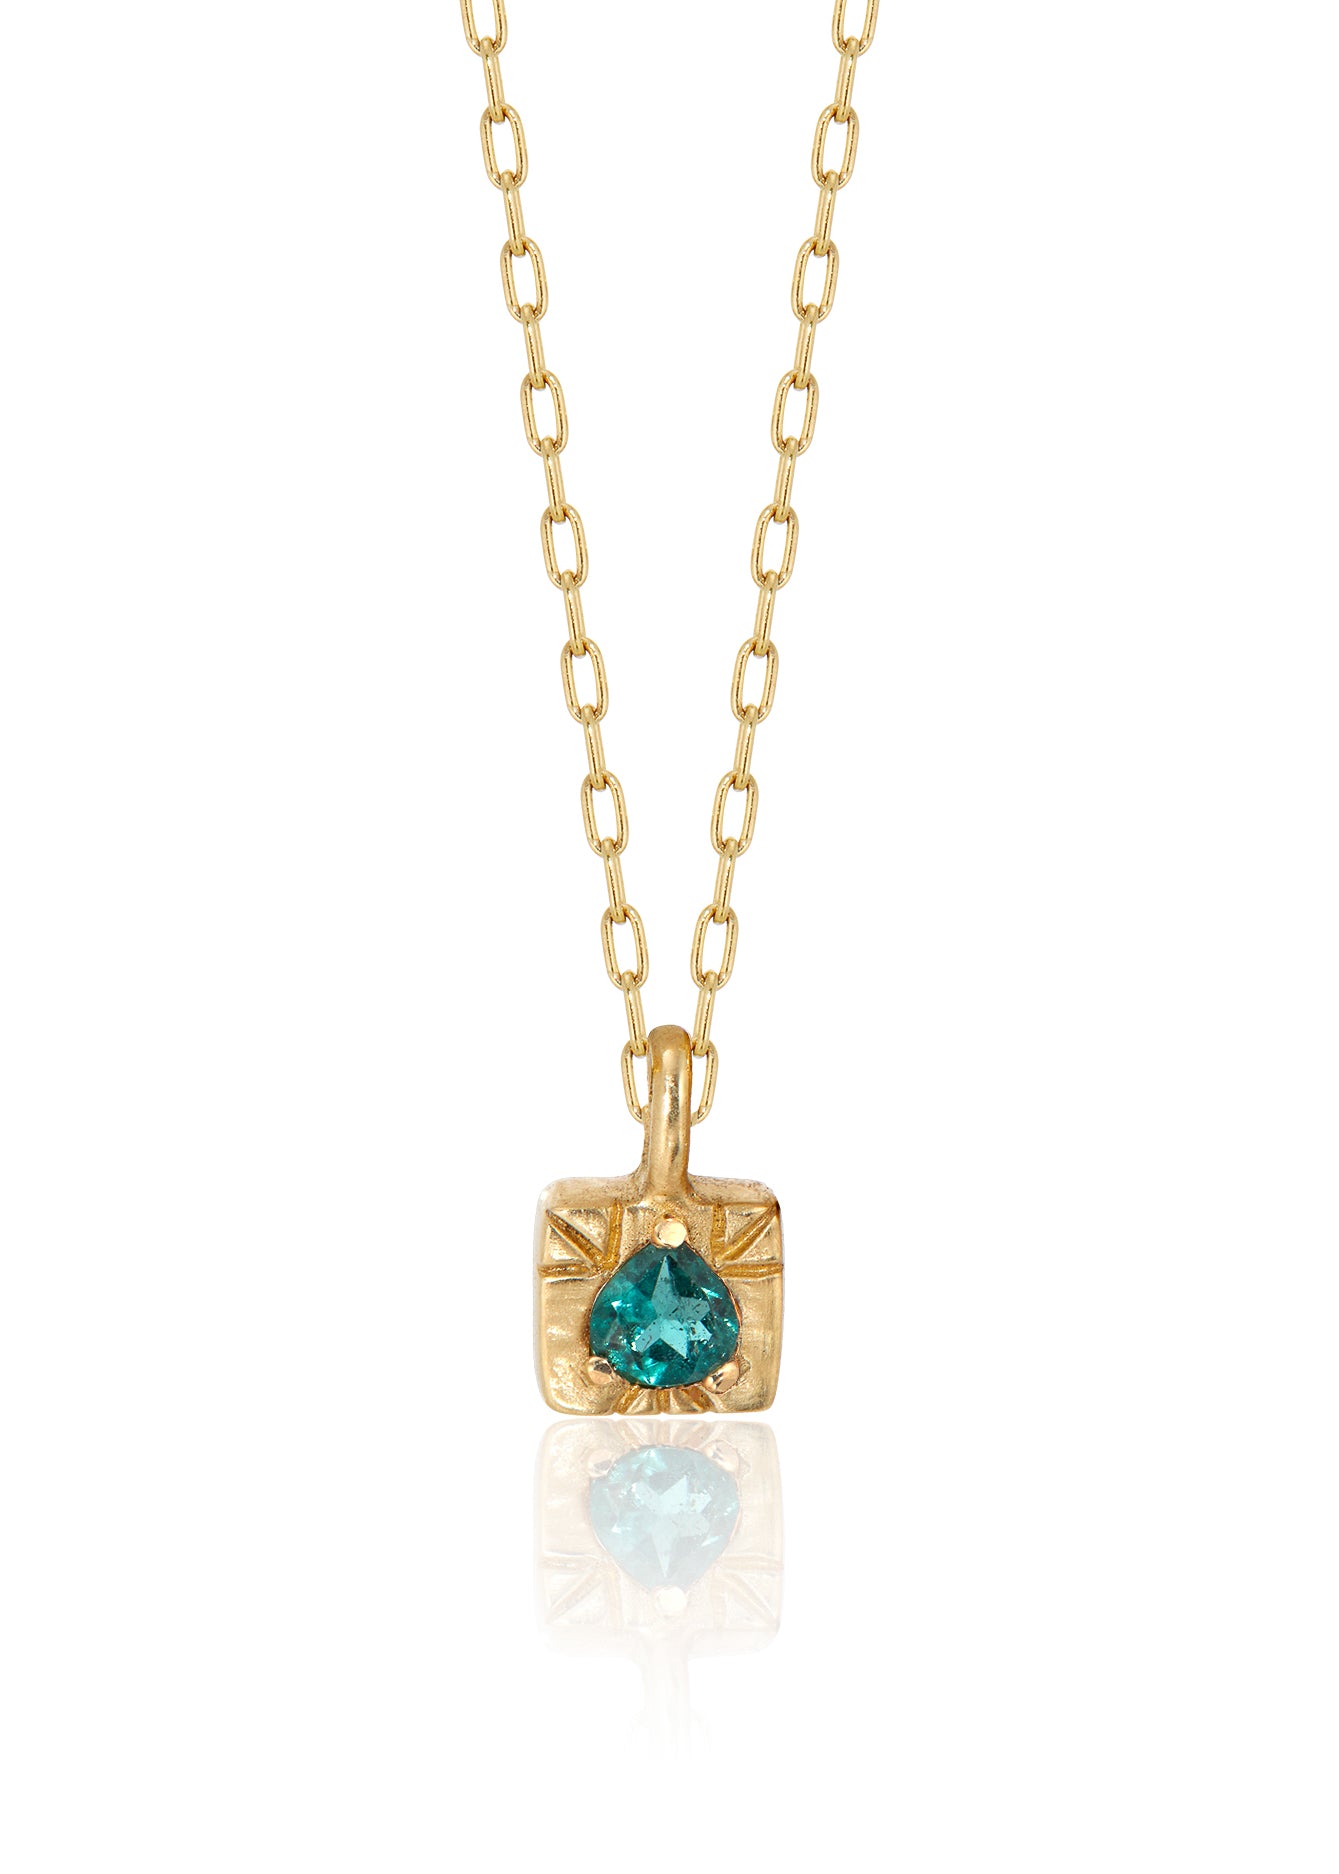 The fire of inspiration ignites with a single spark. Named after the Greek goddess of the hearth, the Vesta necklace features an engraved box-shaped gold charm with a tourmaline stone that glimmers like sacred embers–a piece that glows with promise and warmth. 